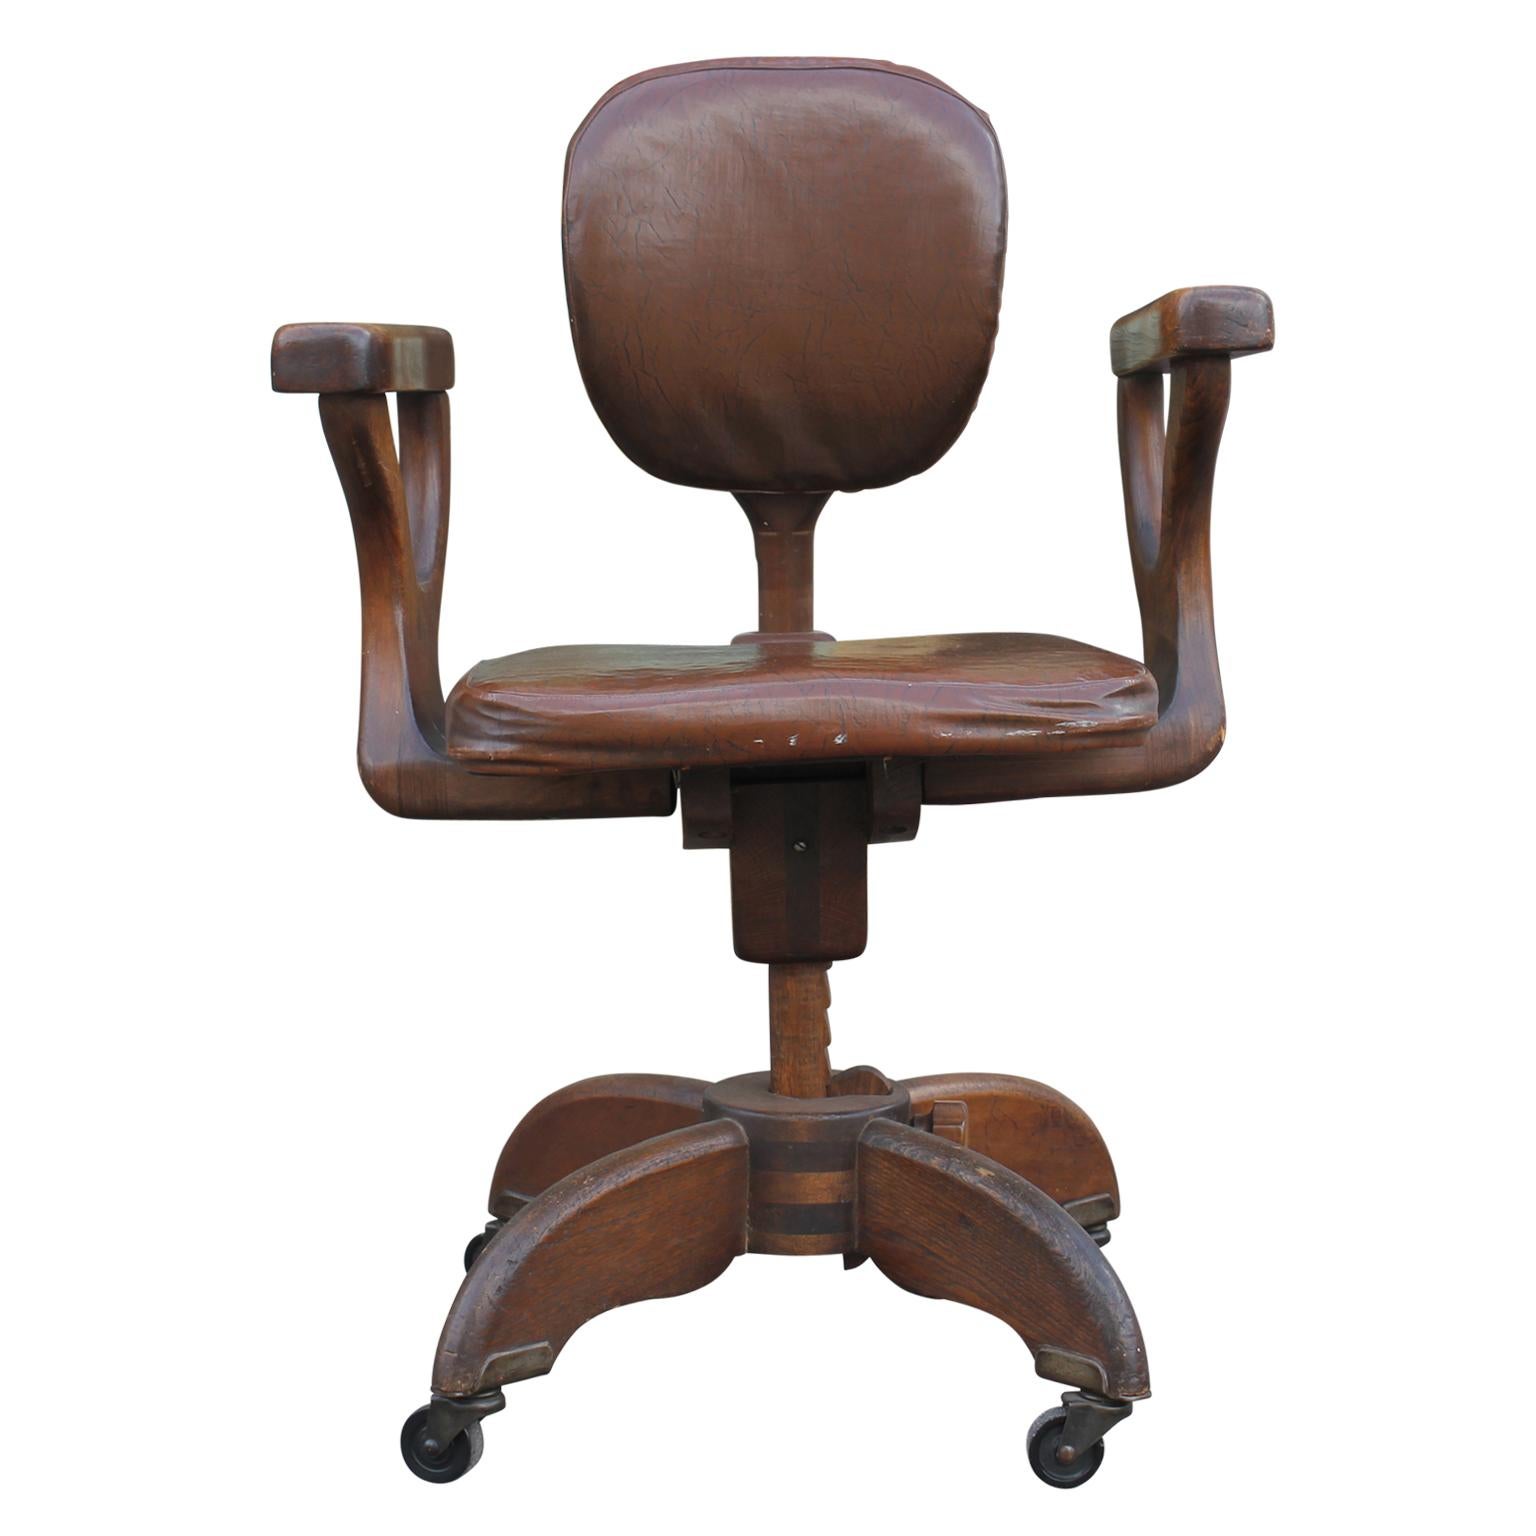 Craftsman style office chair with entirely wooden adjustable mechanisms. Seat area covered in Naugahyde material. Chair is on a set of 4 rollers.